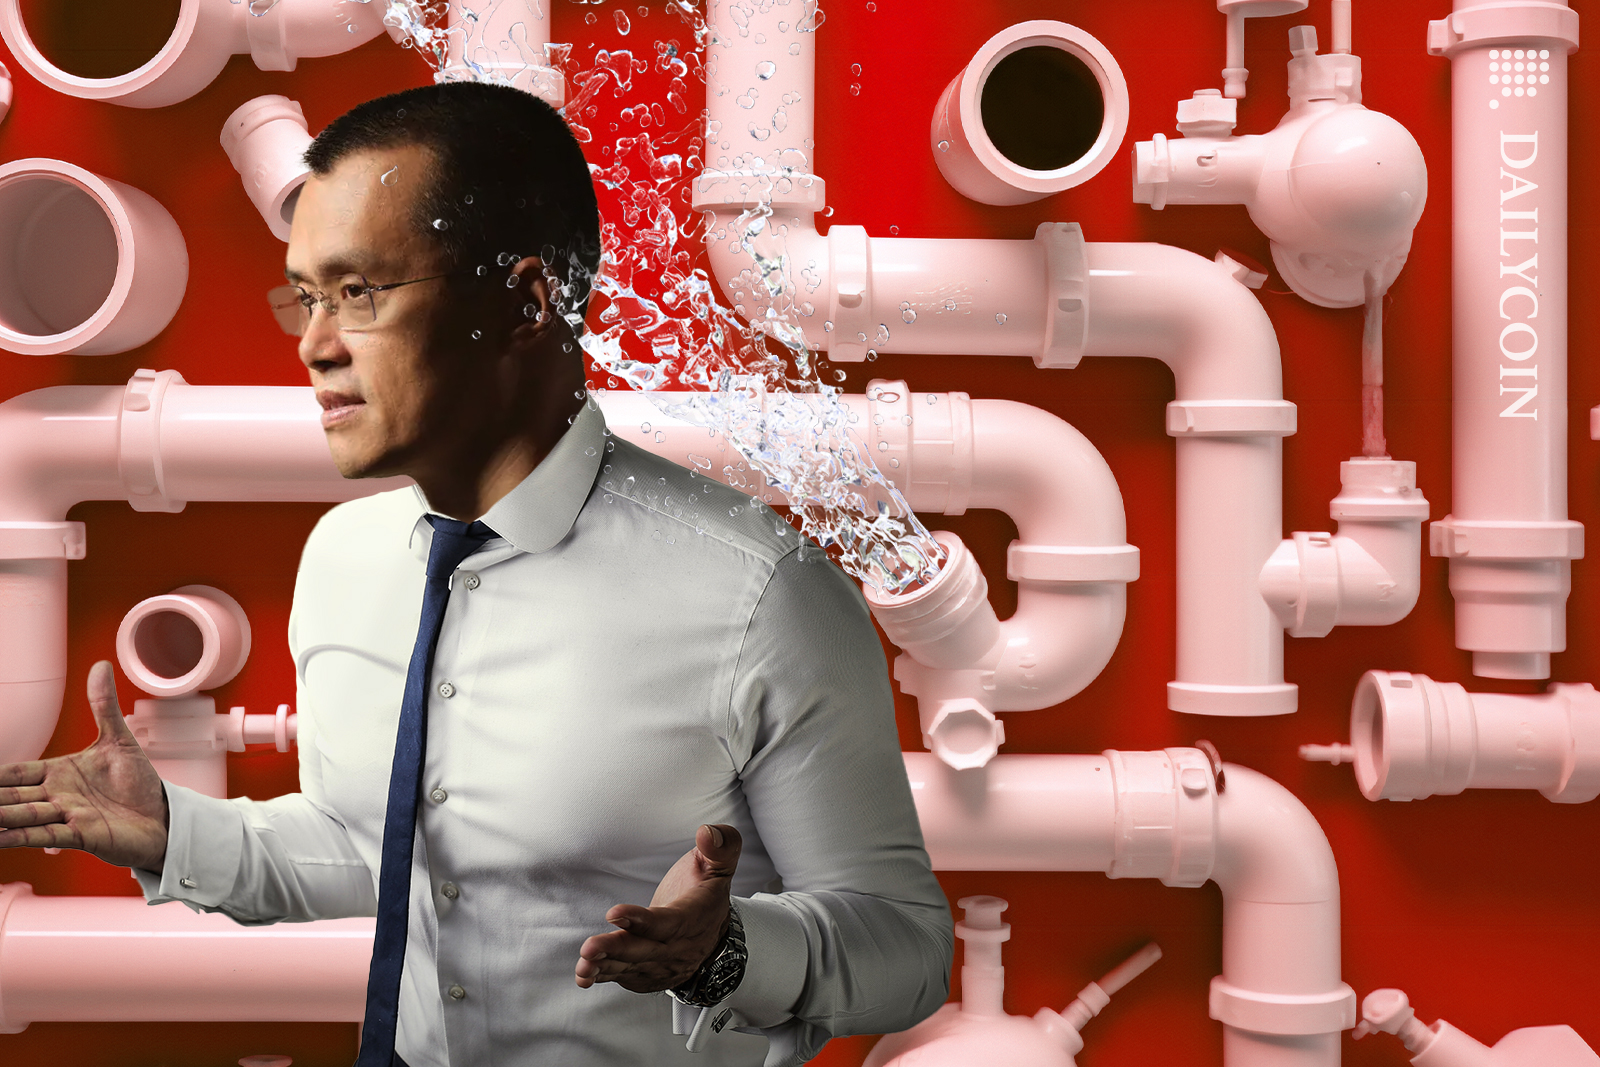 Changpeng Zhao of Binance concerned with the pipe burst leak.